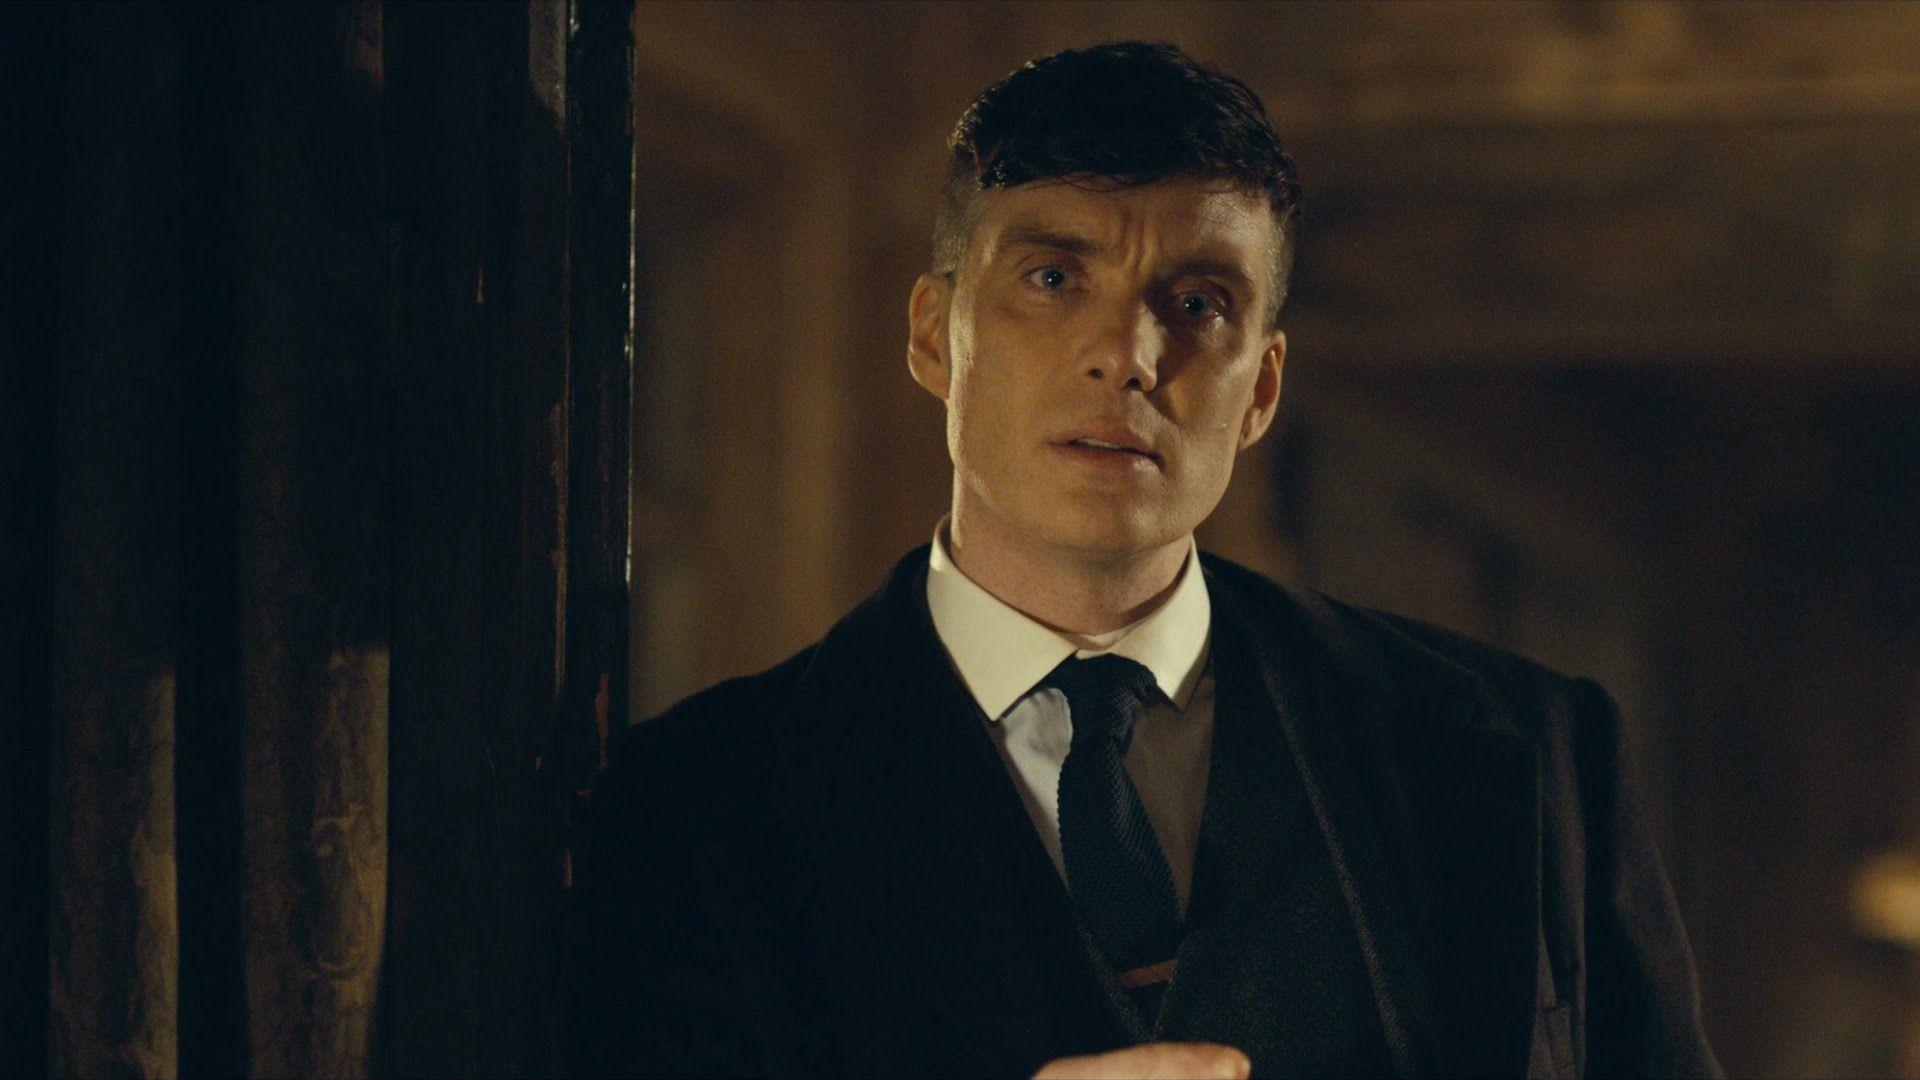 Free download Tommy Shelby Wallpapers Top Tommy Shelby Backgrounds for  Desktop Mobi  Peaky blinders wallpaper Peaky blinders poster Peaky  blinders tommy shelby